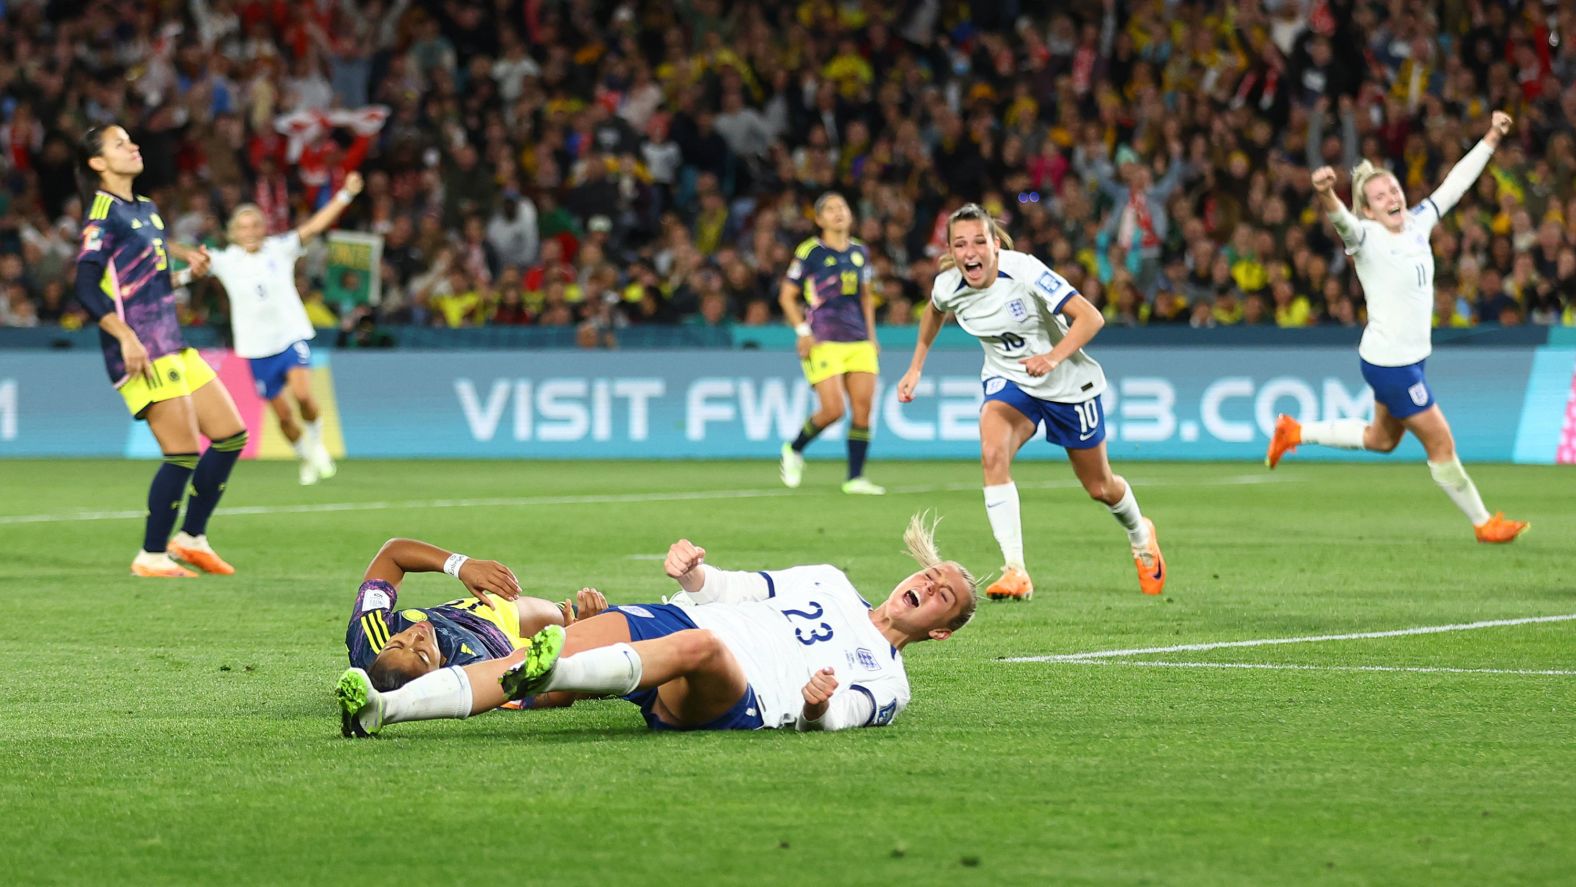 Alessia Russo, bottom, celebrates after scoring England's second goal in the <a href="index.php?page=&url=https%3A%2F%2Fwww.cnn.com%2F2023%2F08%2F12%2Ffootball%2Fengland-colombia-womens-world-cup-2023-spt-intl%2Findex.html" target="_blank">2-1 over Colombia</a> in the quarterfinals on August 12.